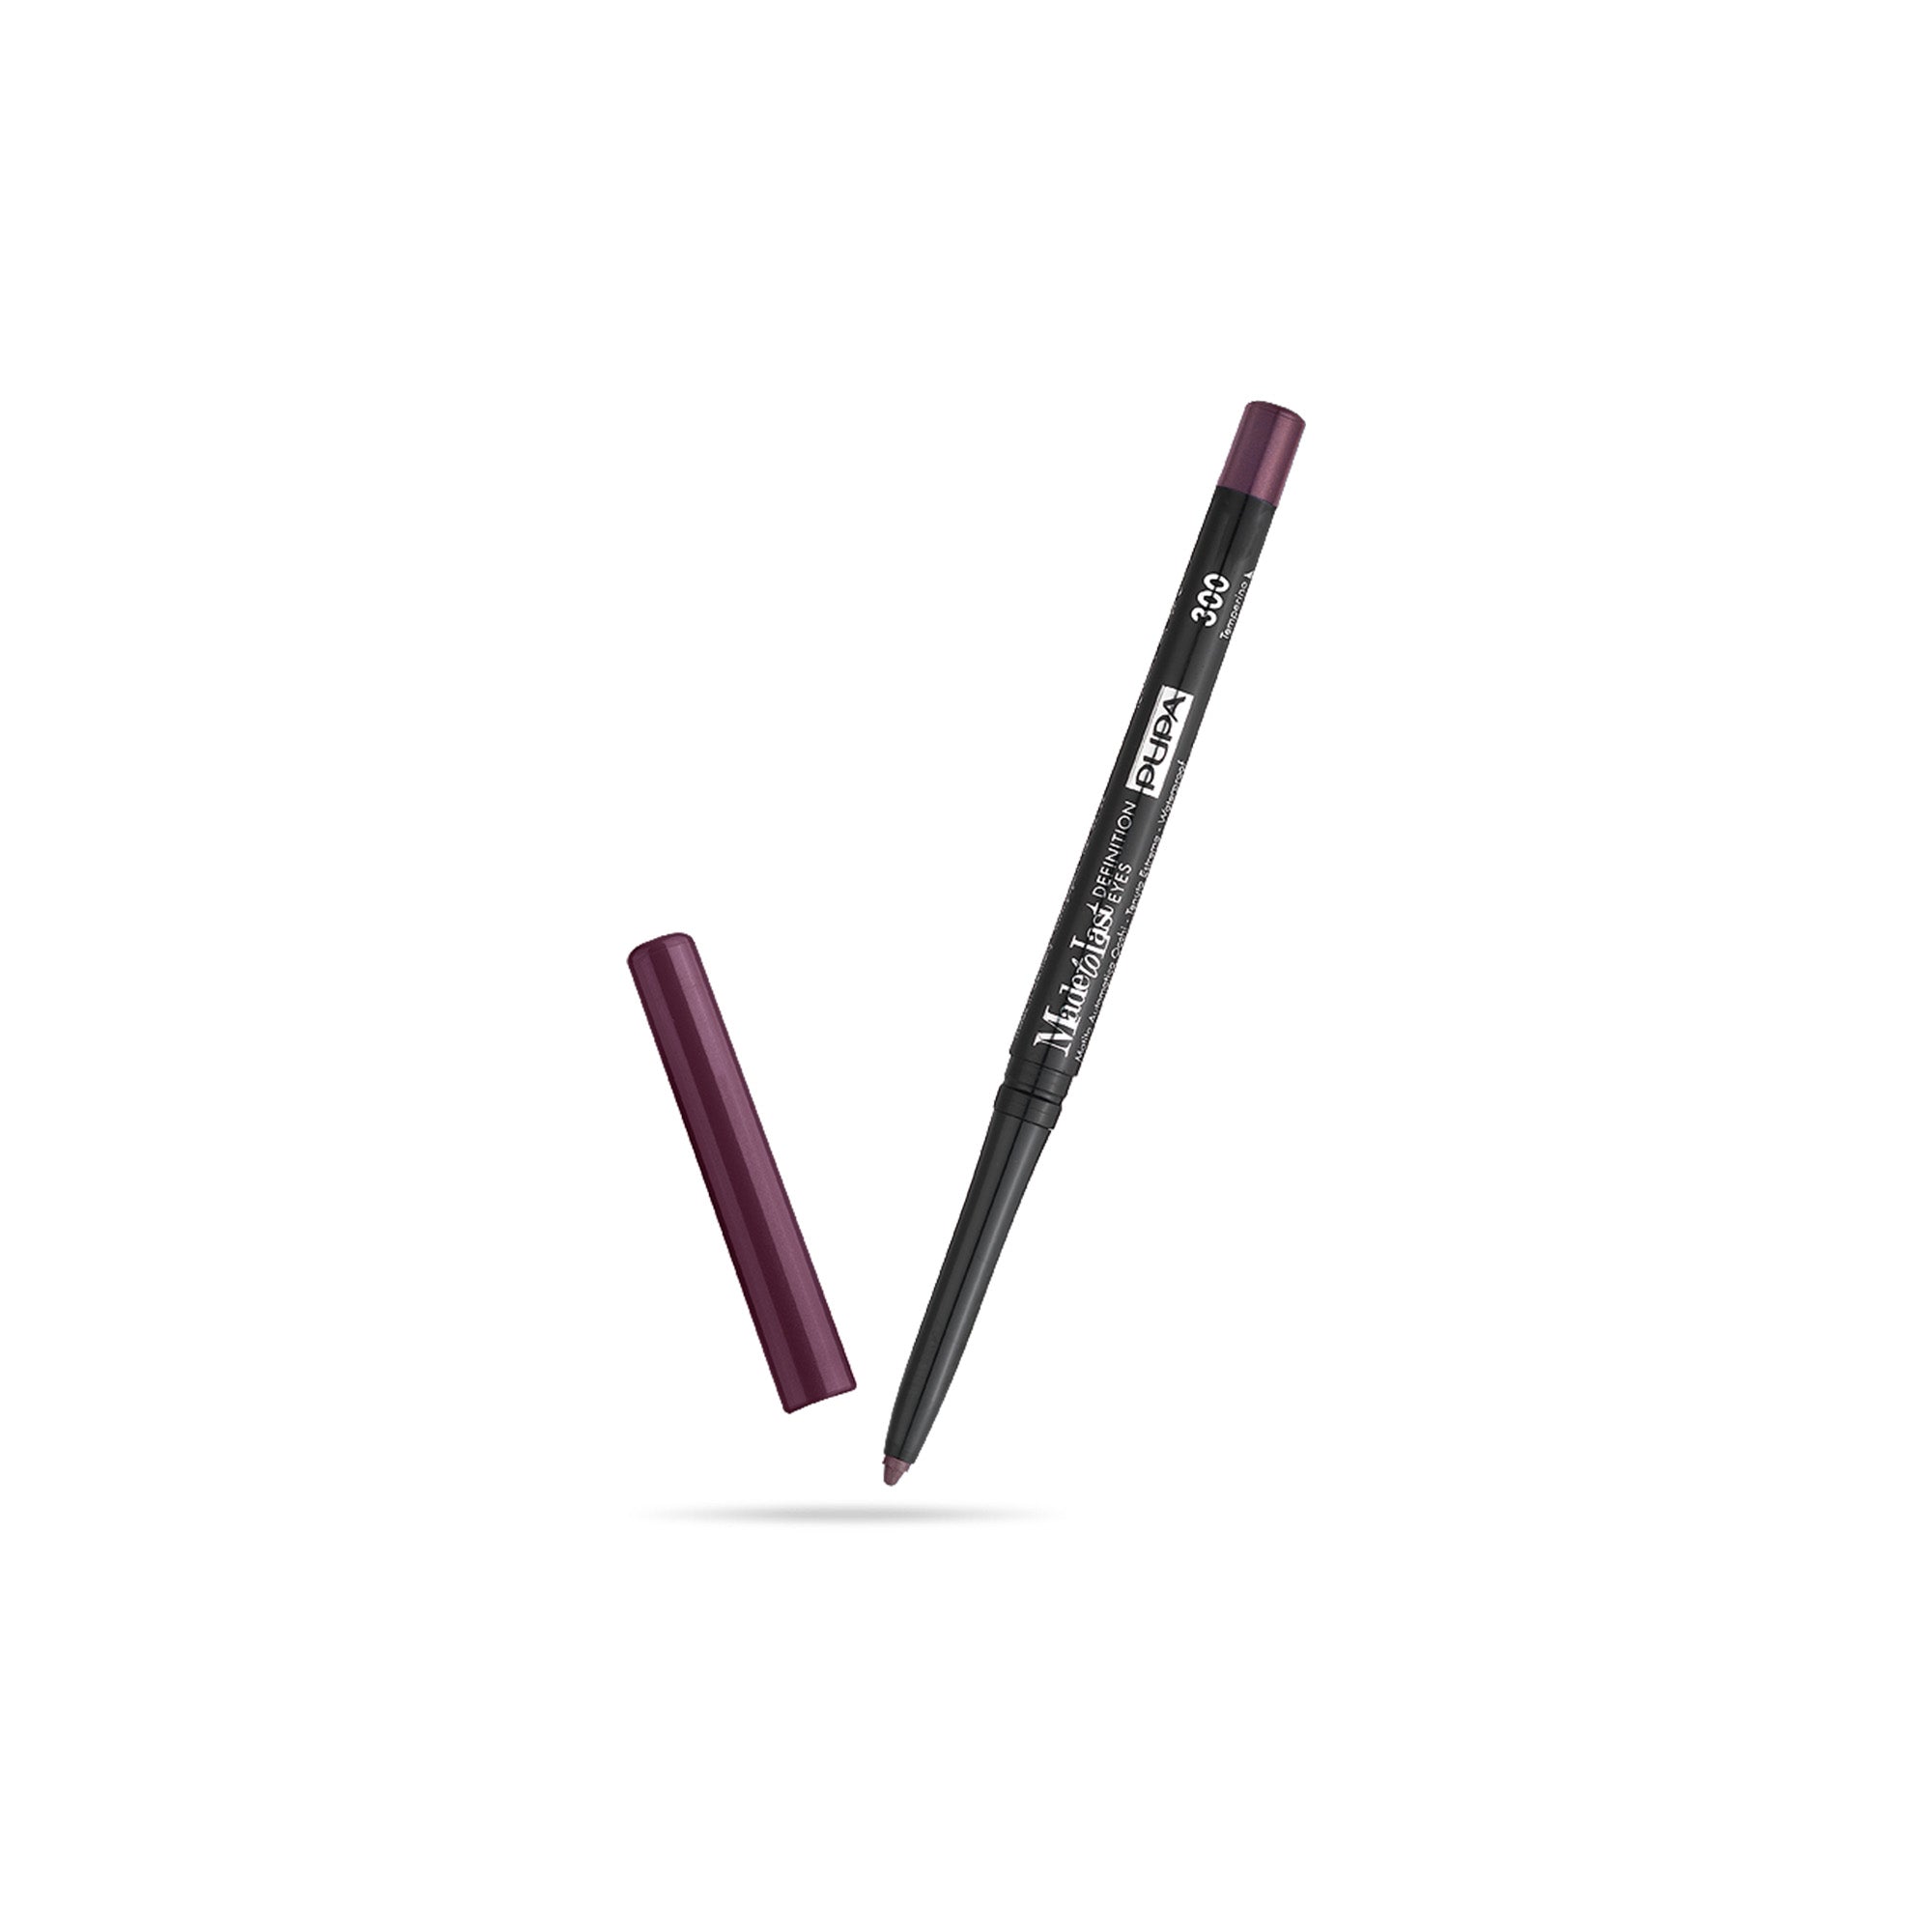 Made to Last Defining Eye Pencil